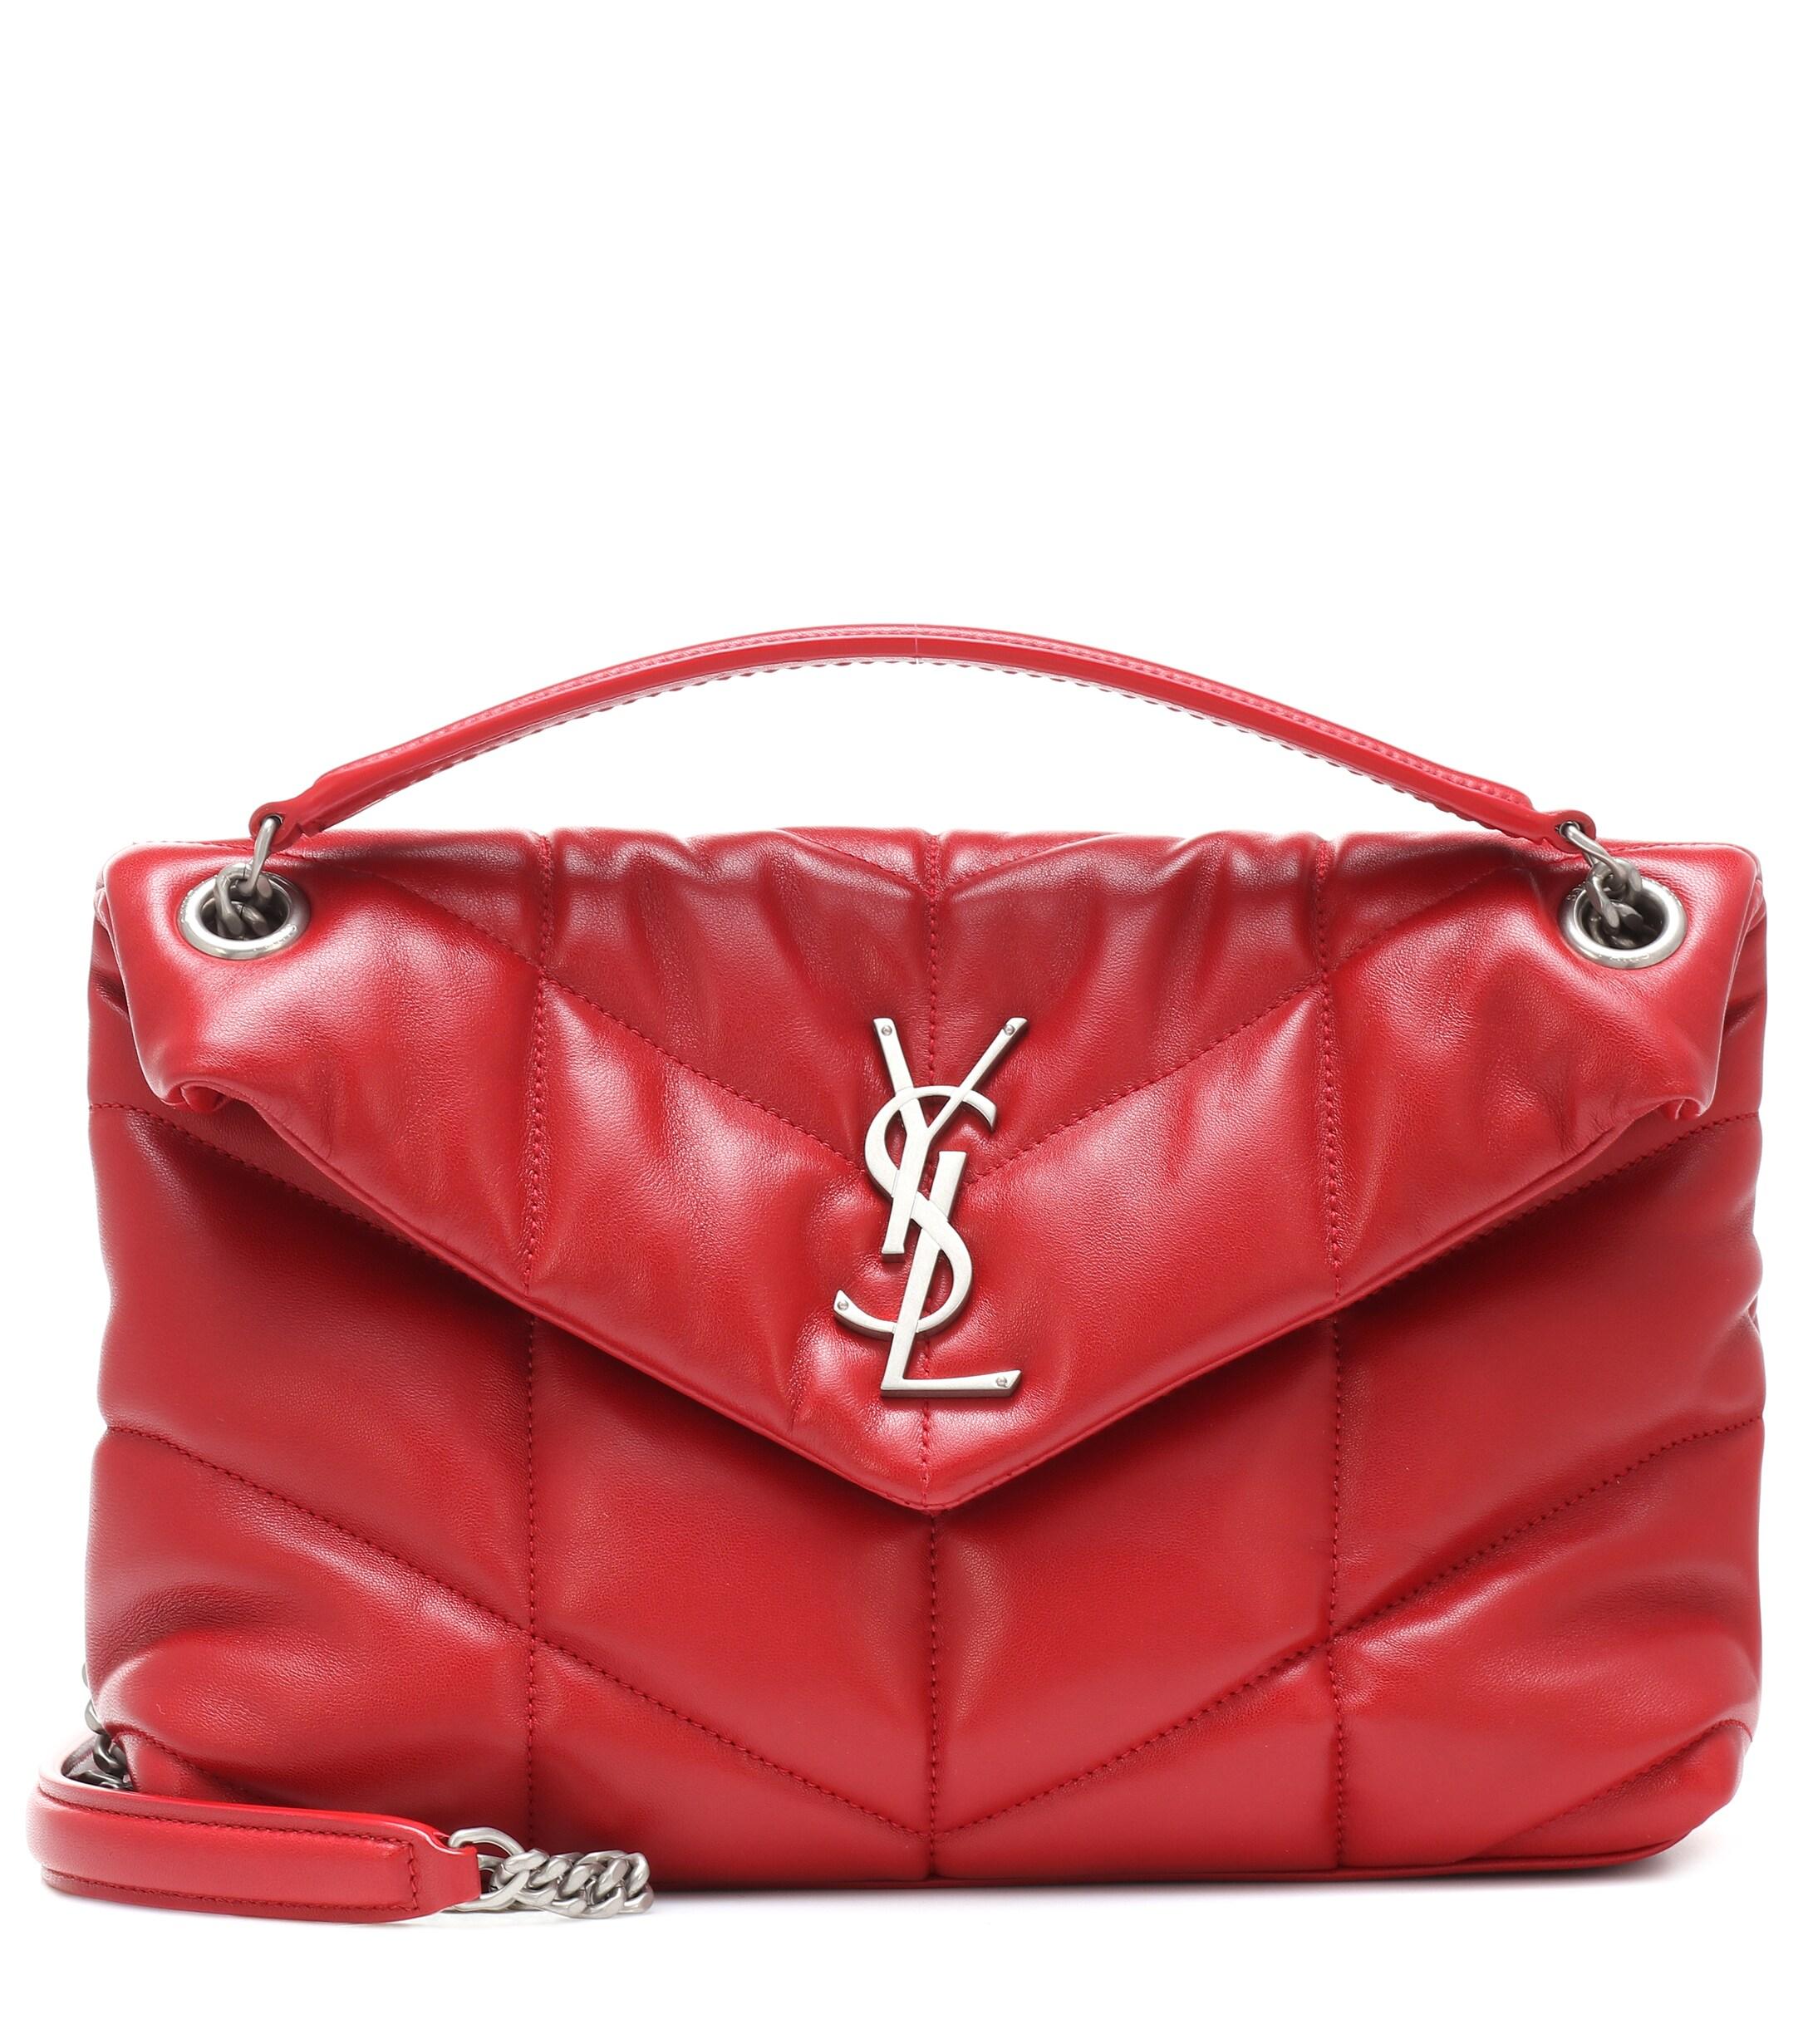 Saint Laurent Loulou Puffer Small Shoulder Bag in Red | Lyst